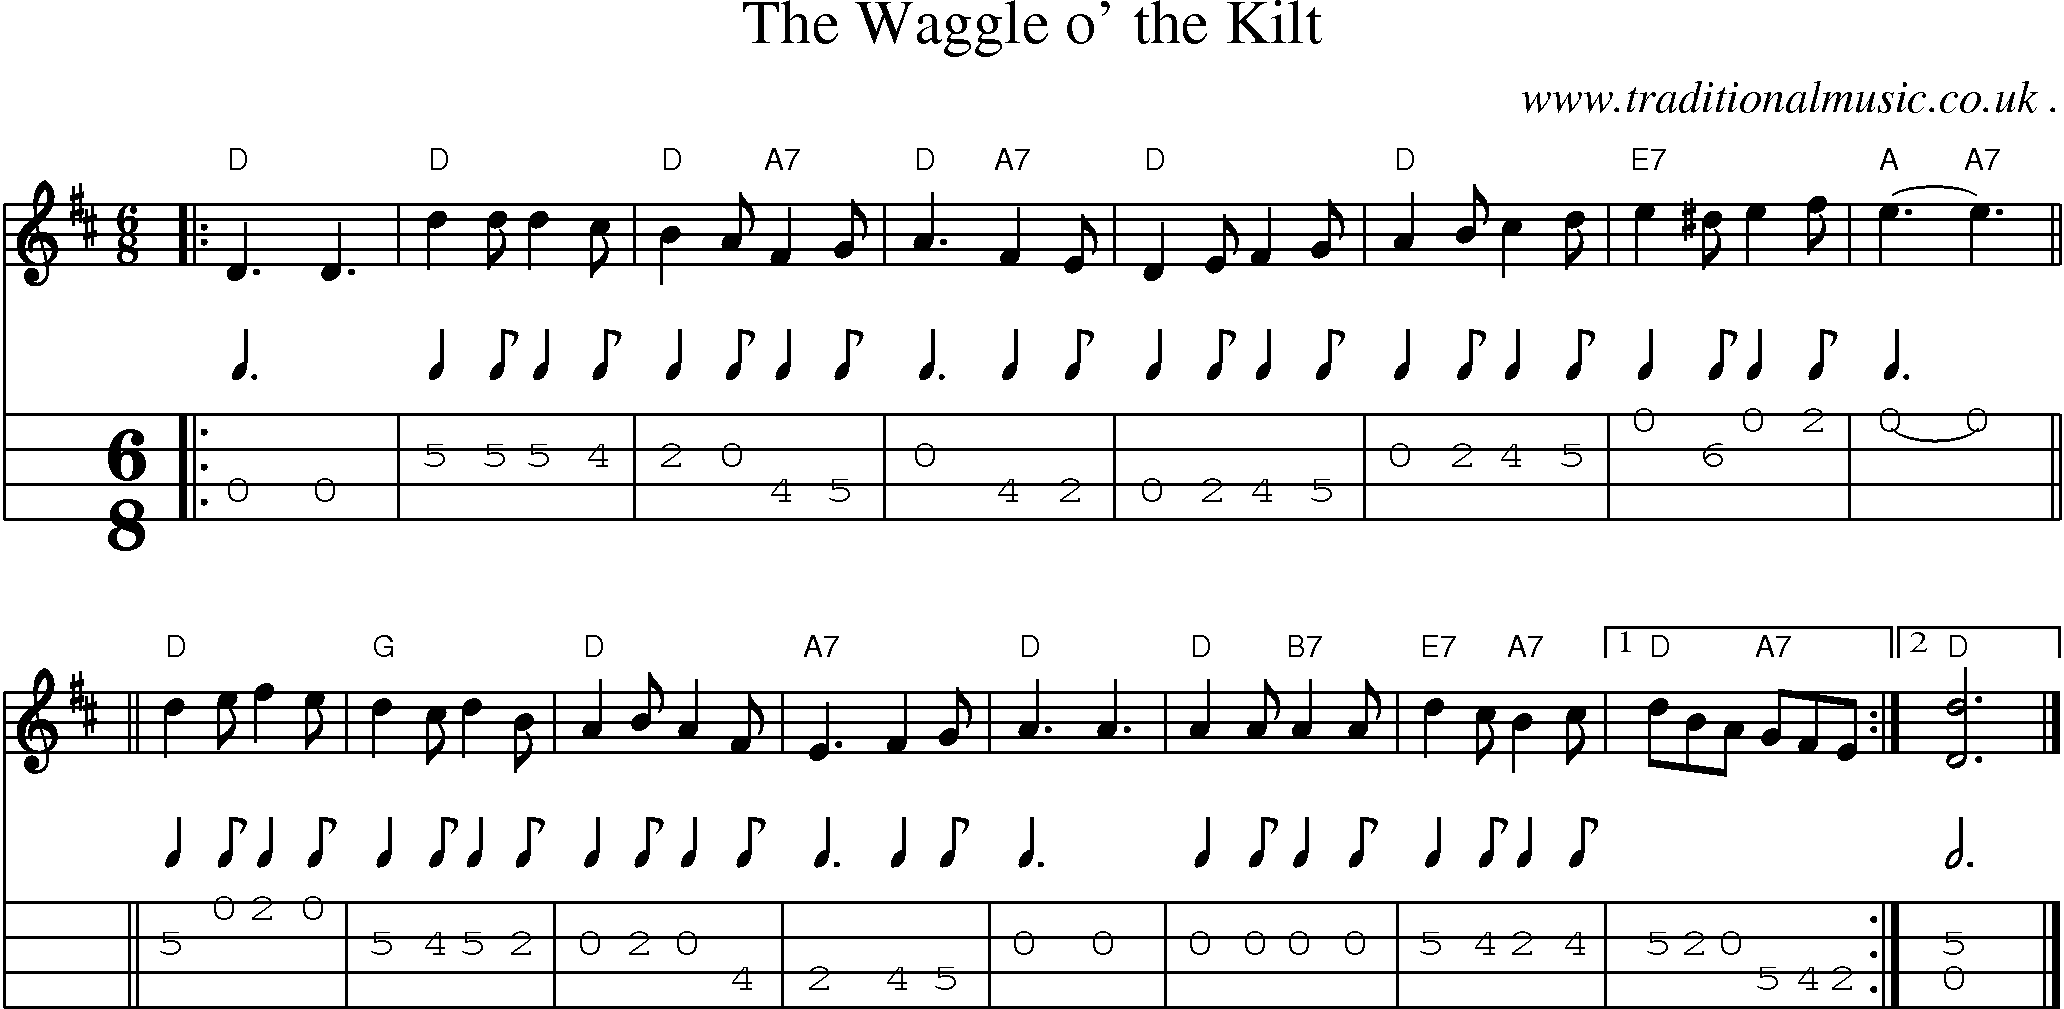 Sheet-music  score, Chords and Mandolin Tabs for The Waggle O The Kilt